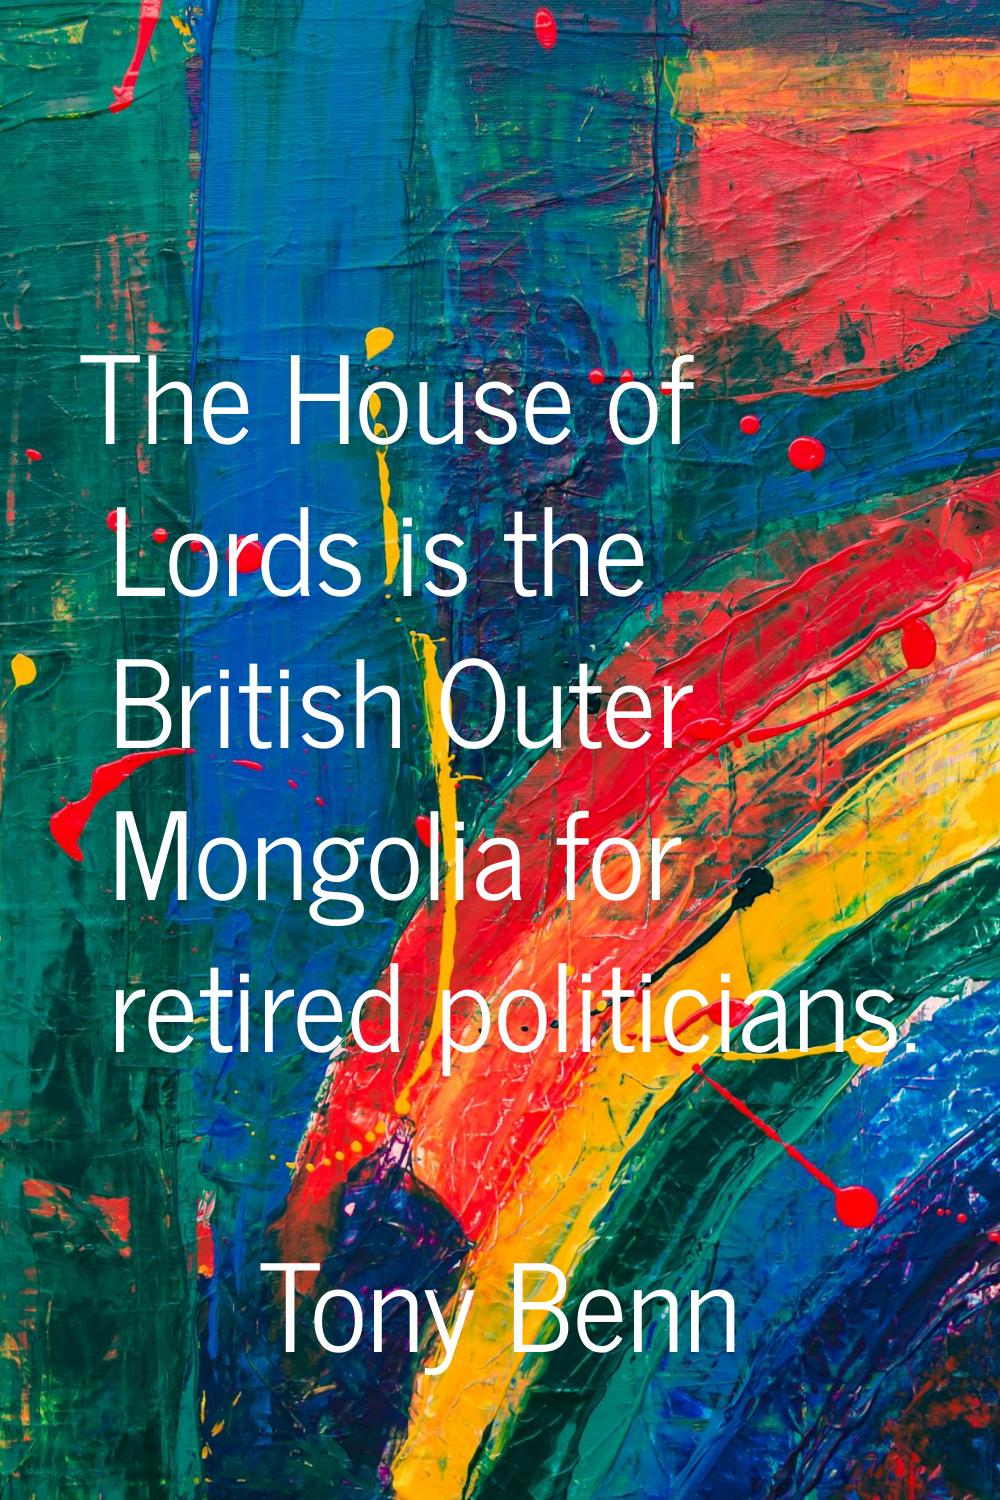 The House of Lords is the British Outer Mongolia for retired politicians.